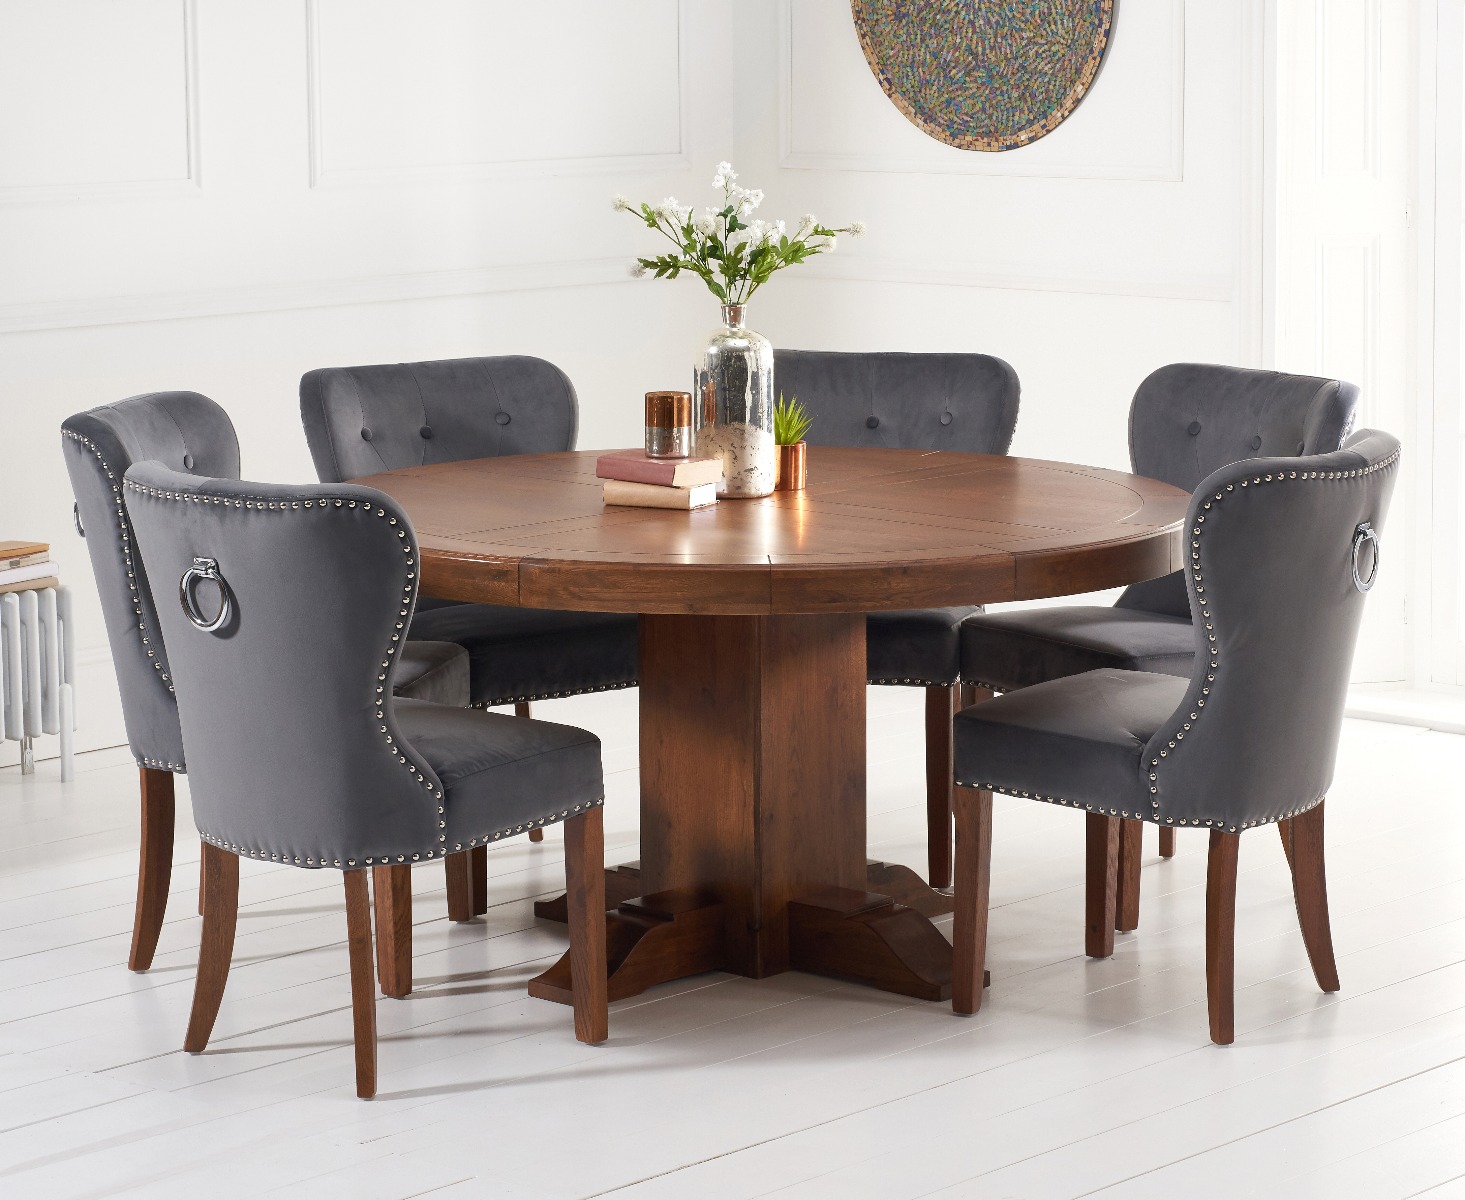 Photo 1 of Helmsley 150cm dark oak round pedestal dining table with 4 grey keswick chairs